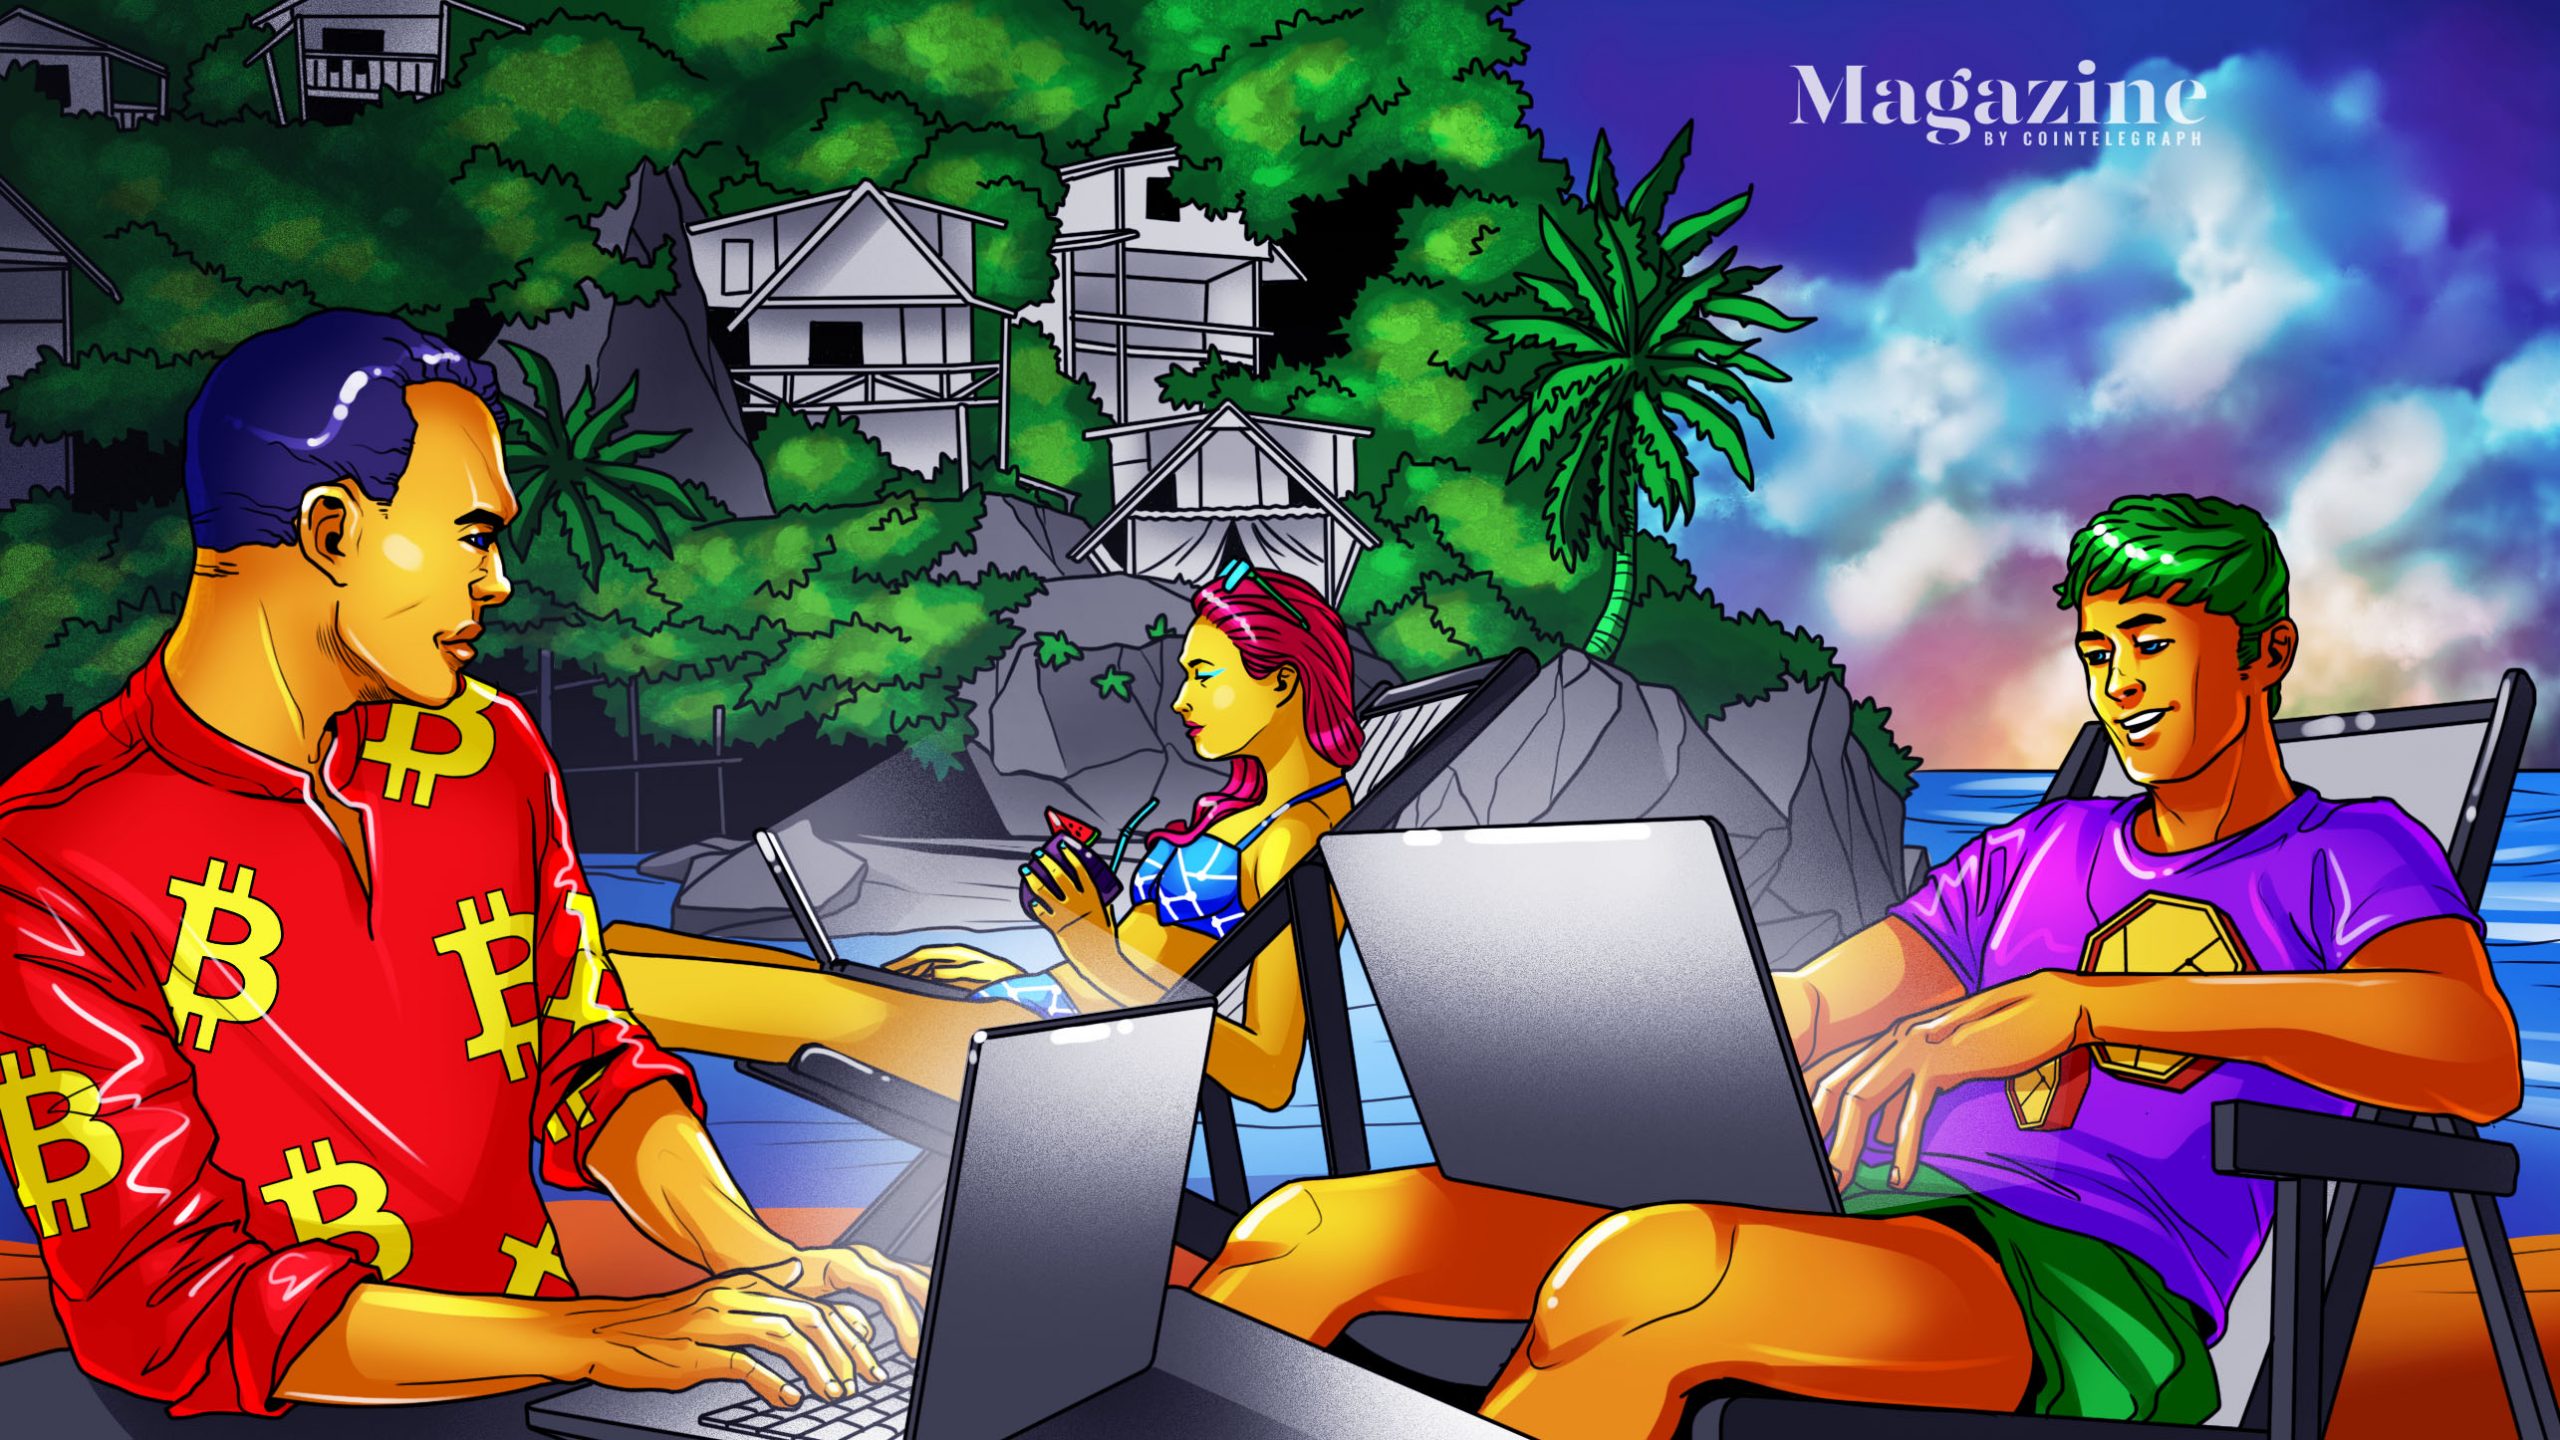 Working in paradise, Part 1 – Cointelegraph Magazine